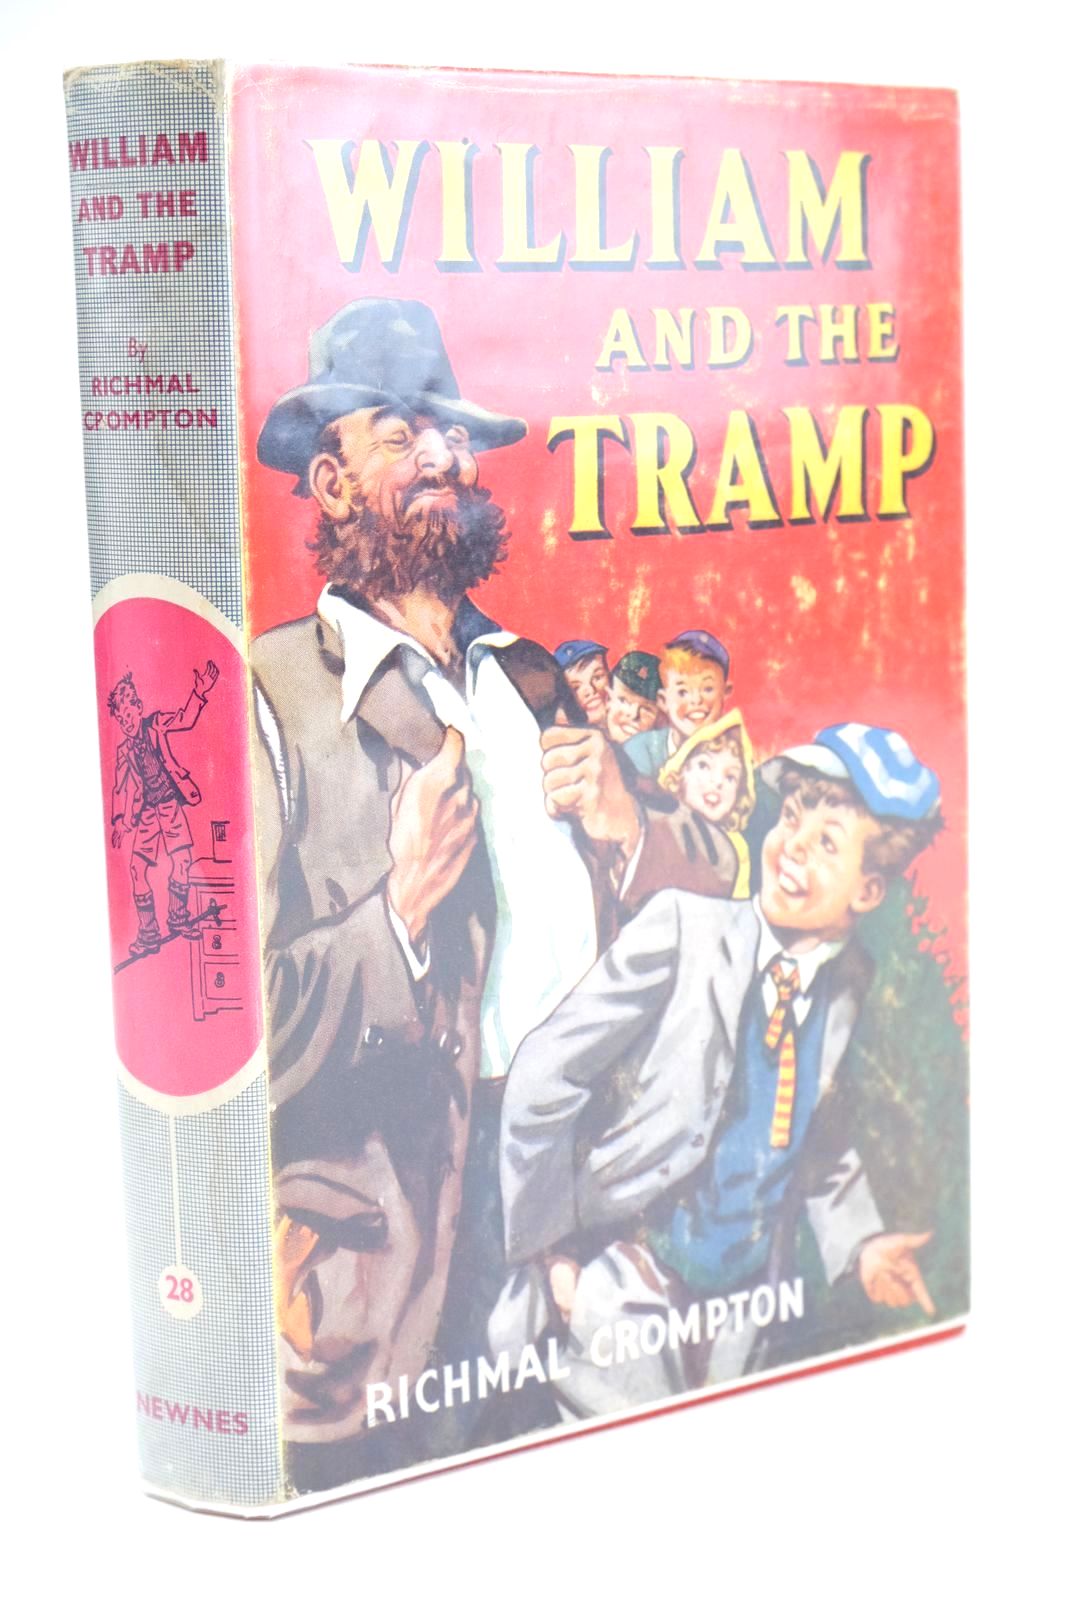 Photo of WILLIAM AND THE TRAMP written by Crompton, Richmal illustrated by Henry, Thomas published by George Newnes Limited (STOCK CODE: 1324716)  for sale by Stella & Rose's Books